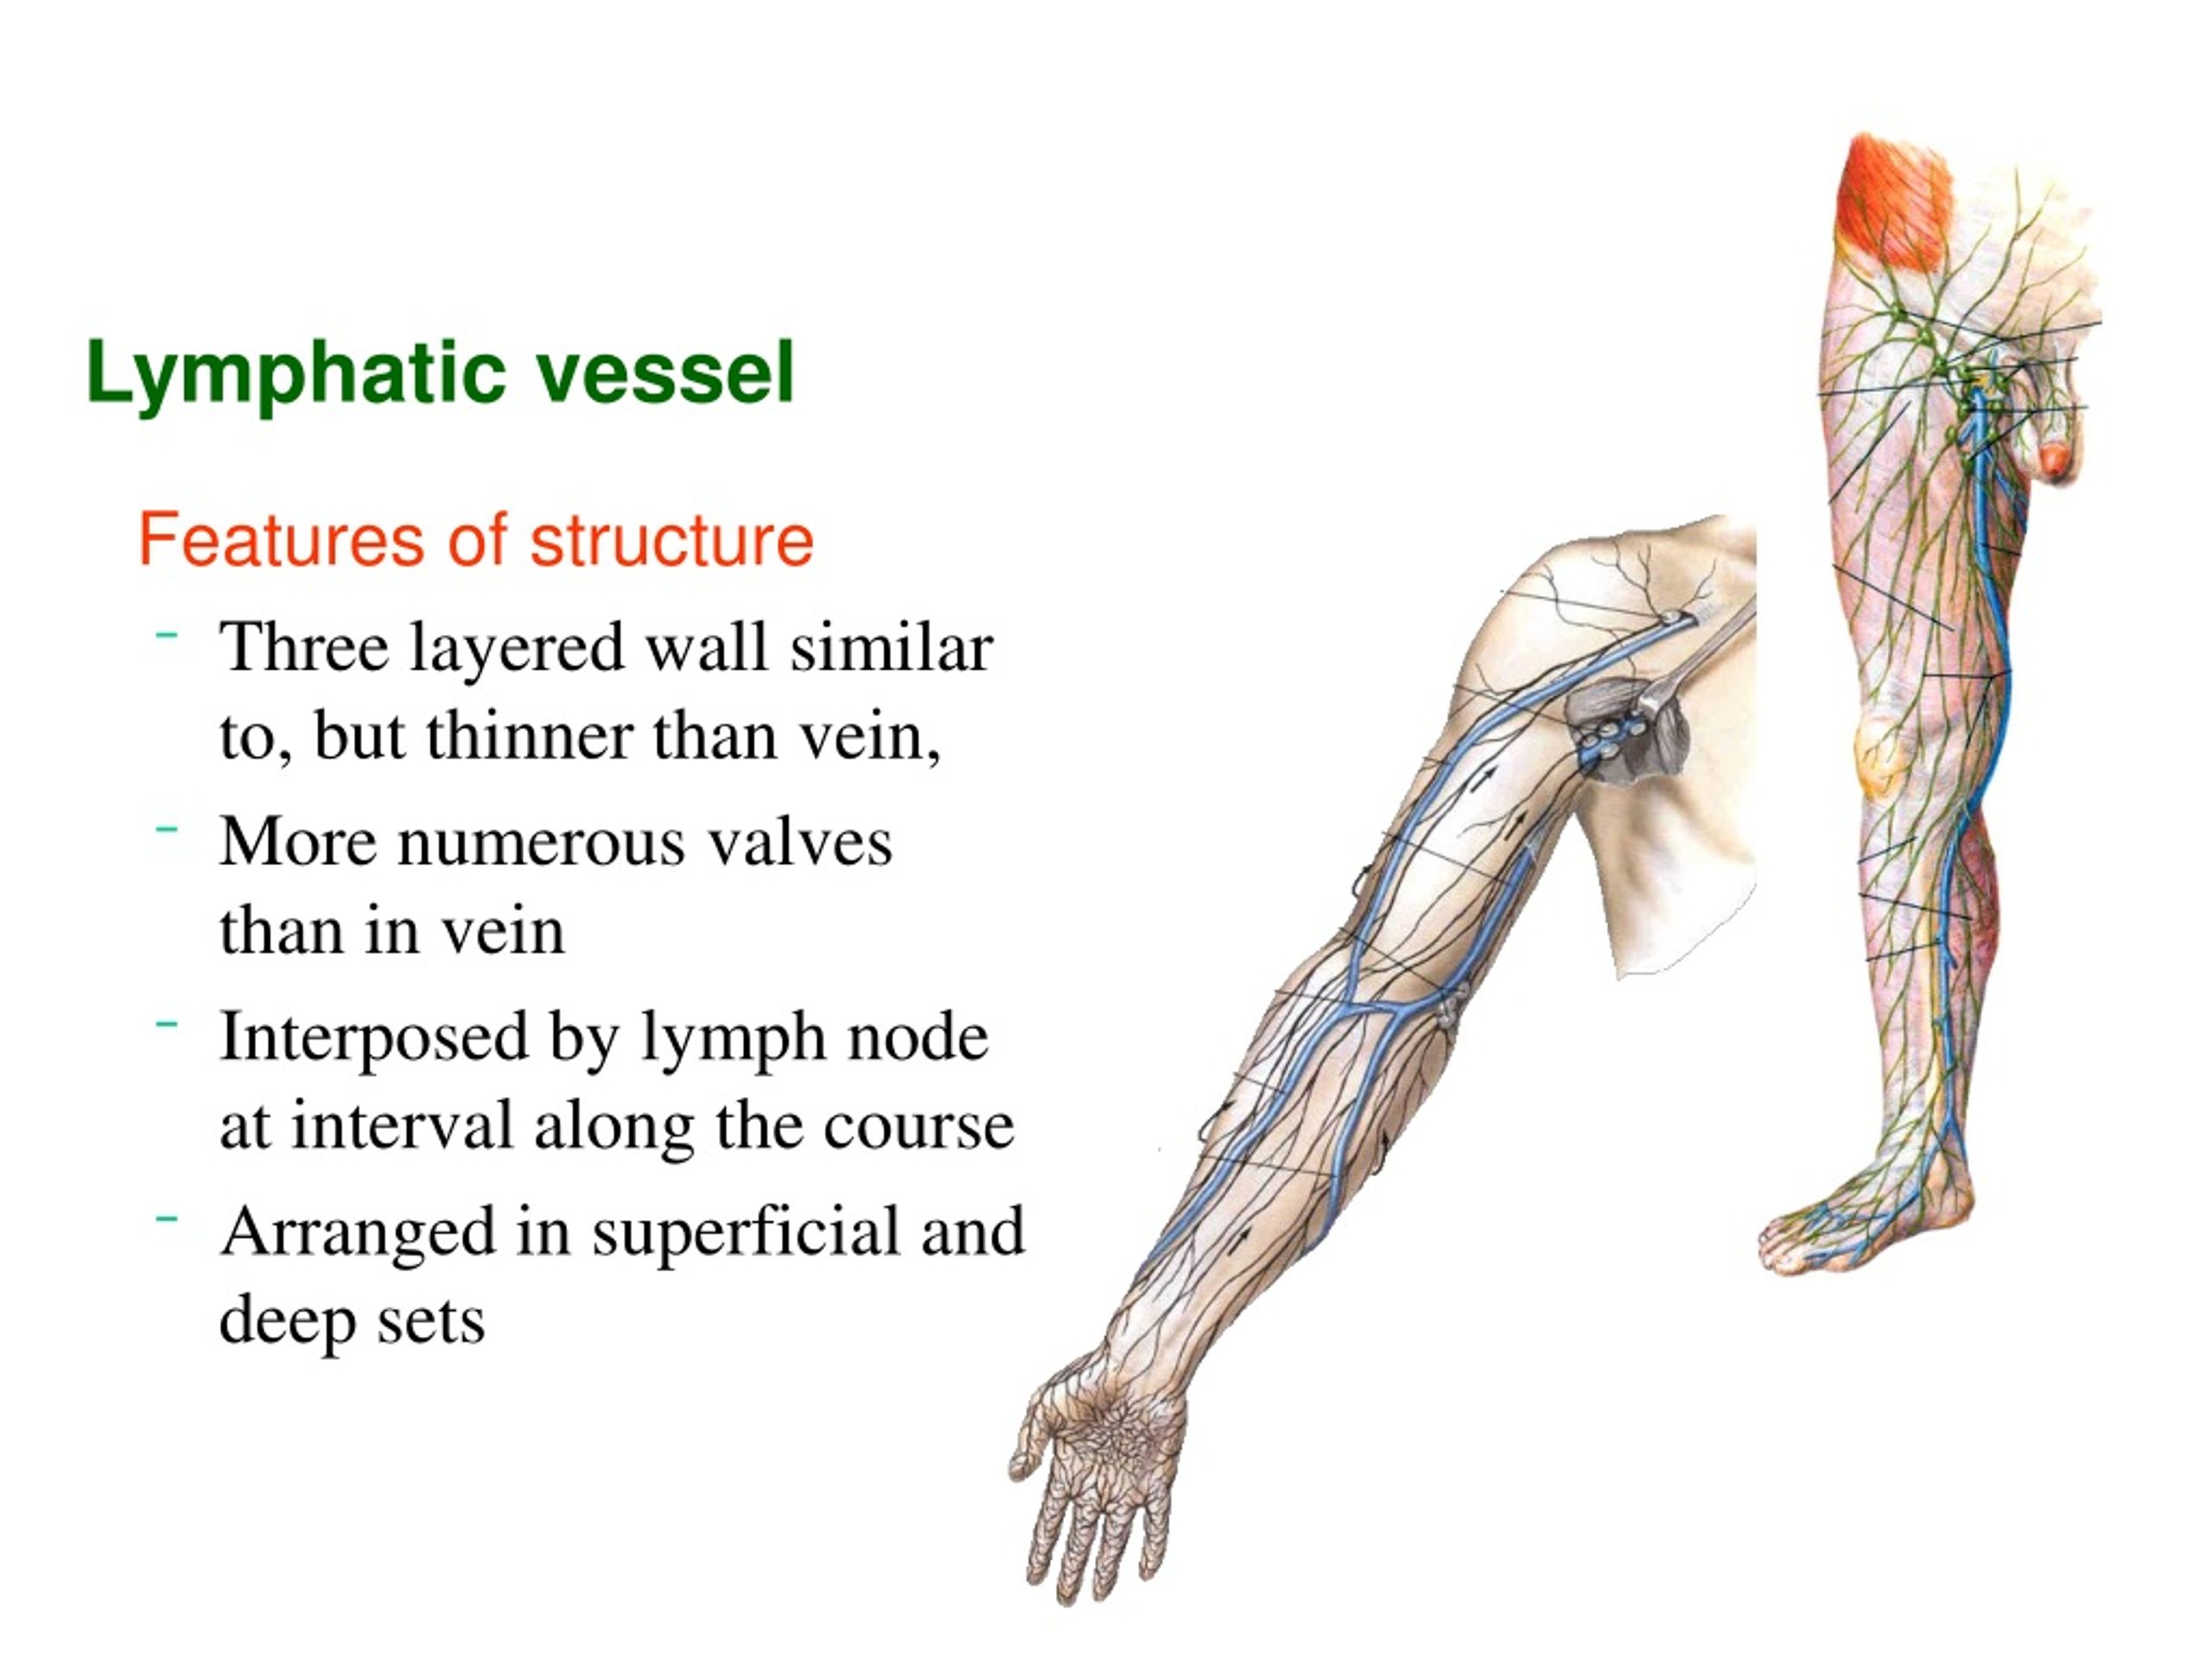 PPT - the lymphatic system PowerPoint Presentation, free download - ID